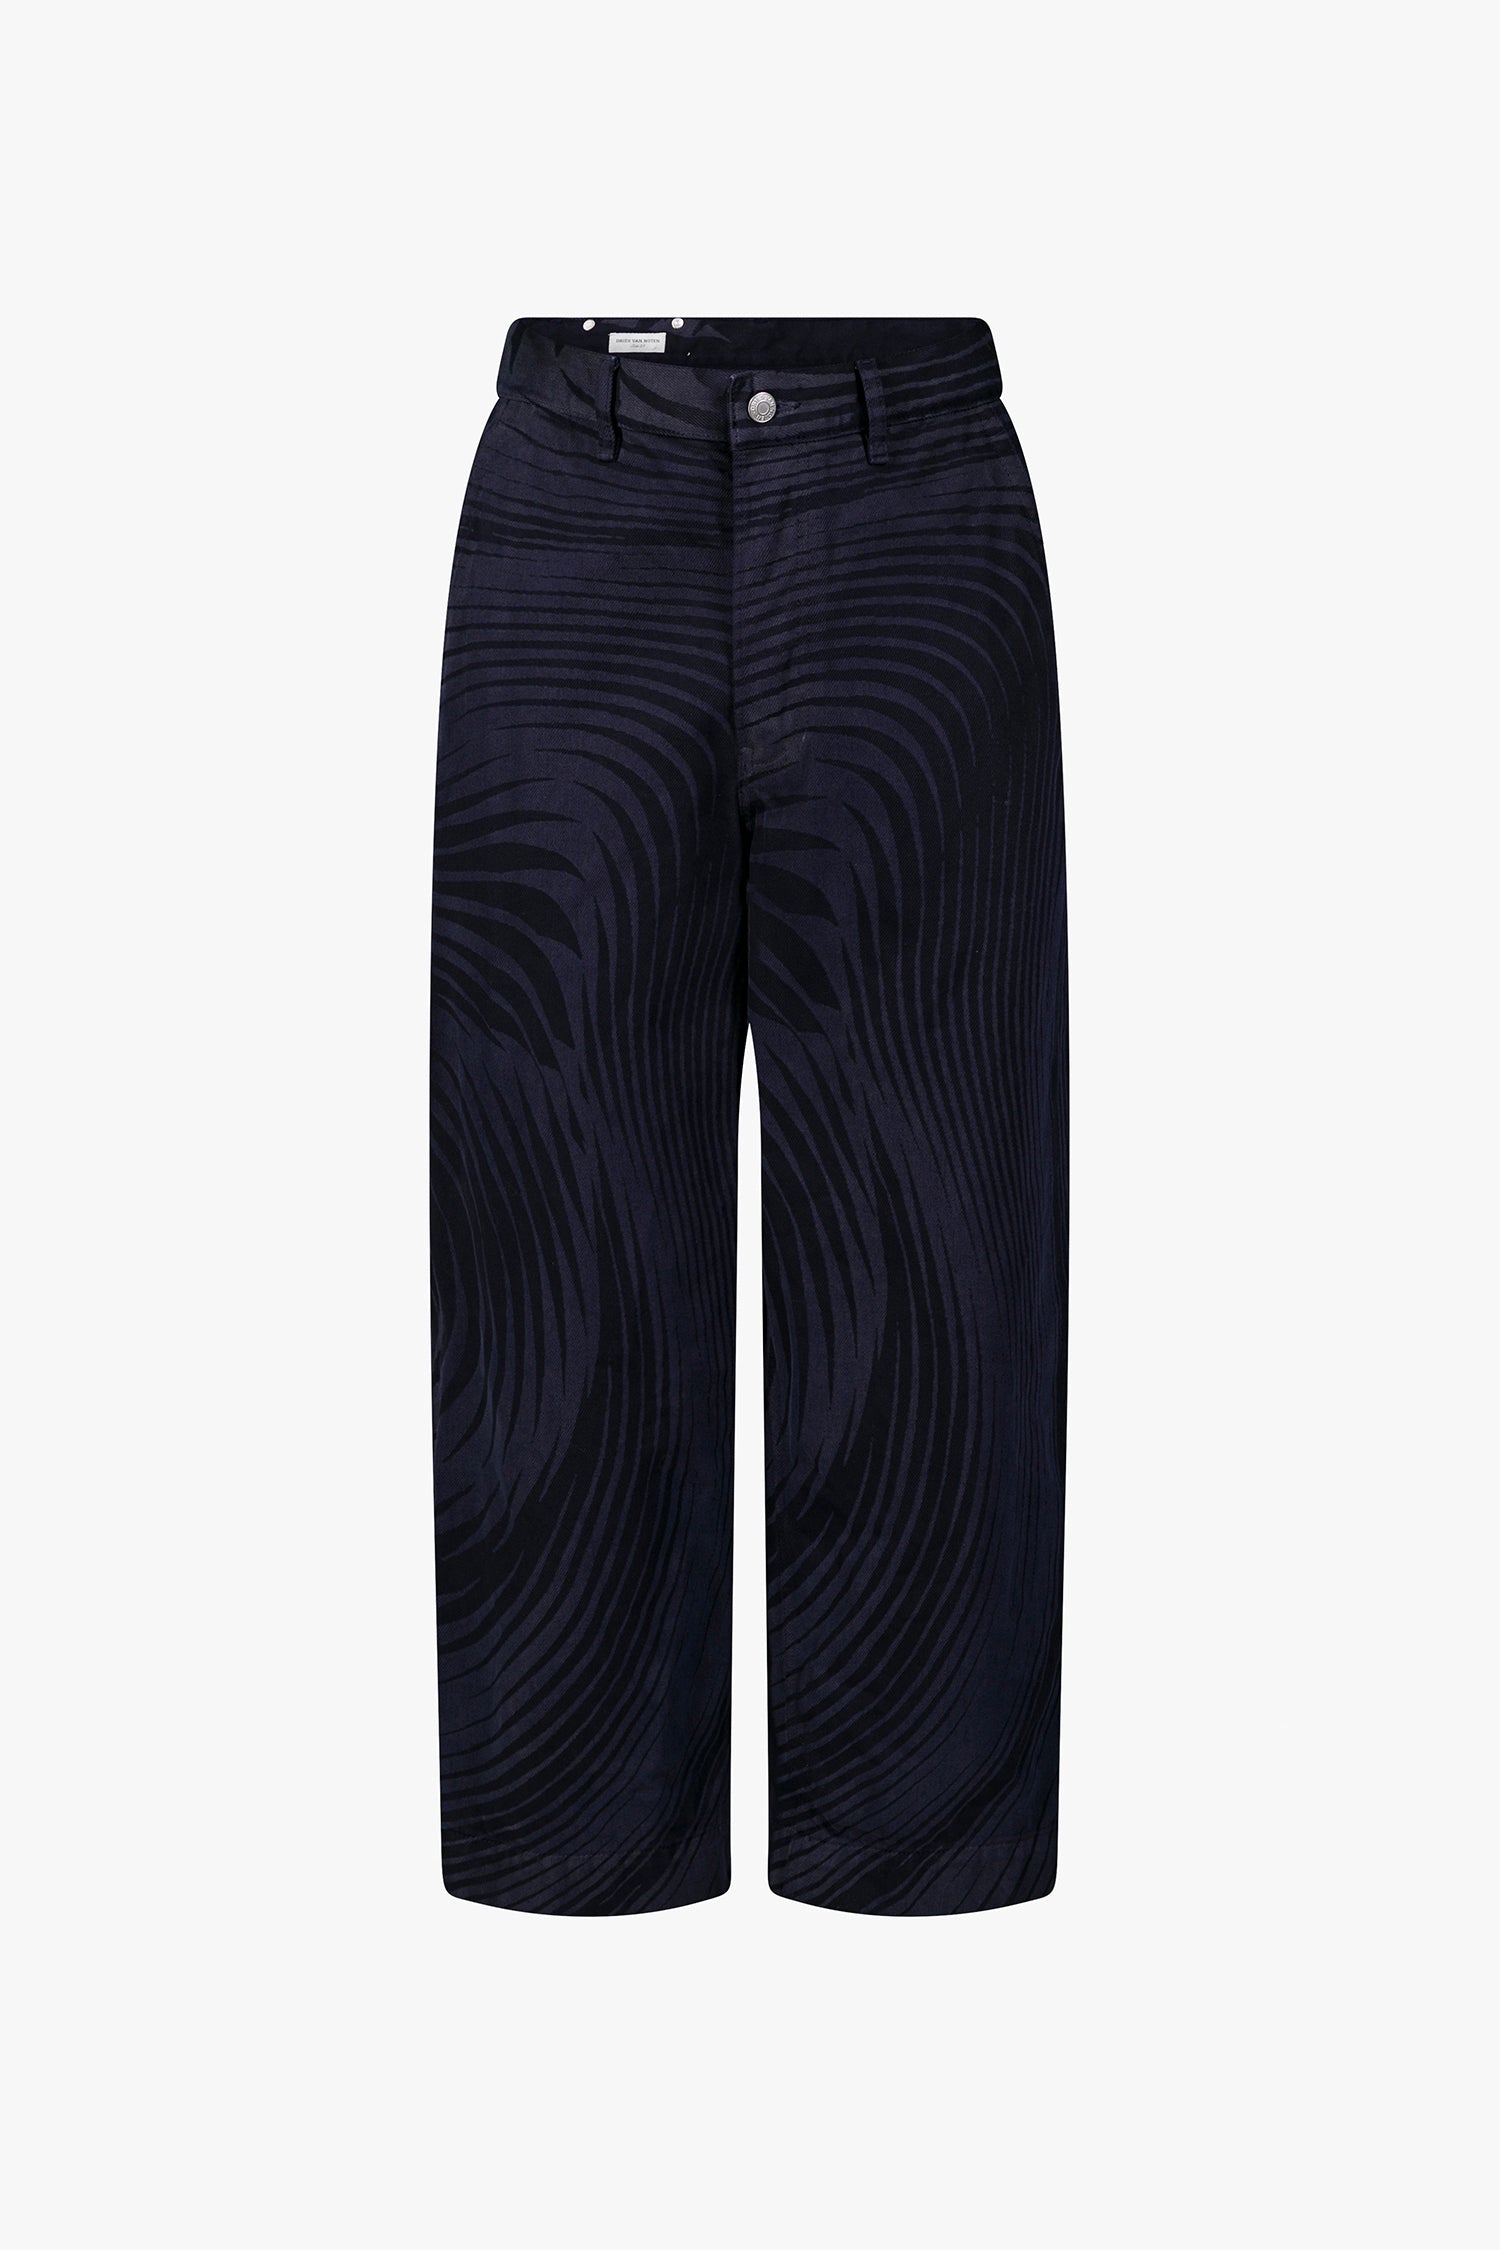 PIP PANTS IN NAVY, AW23